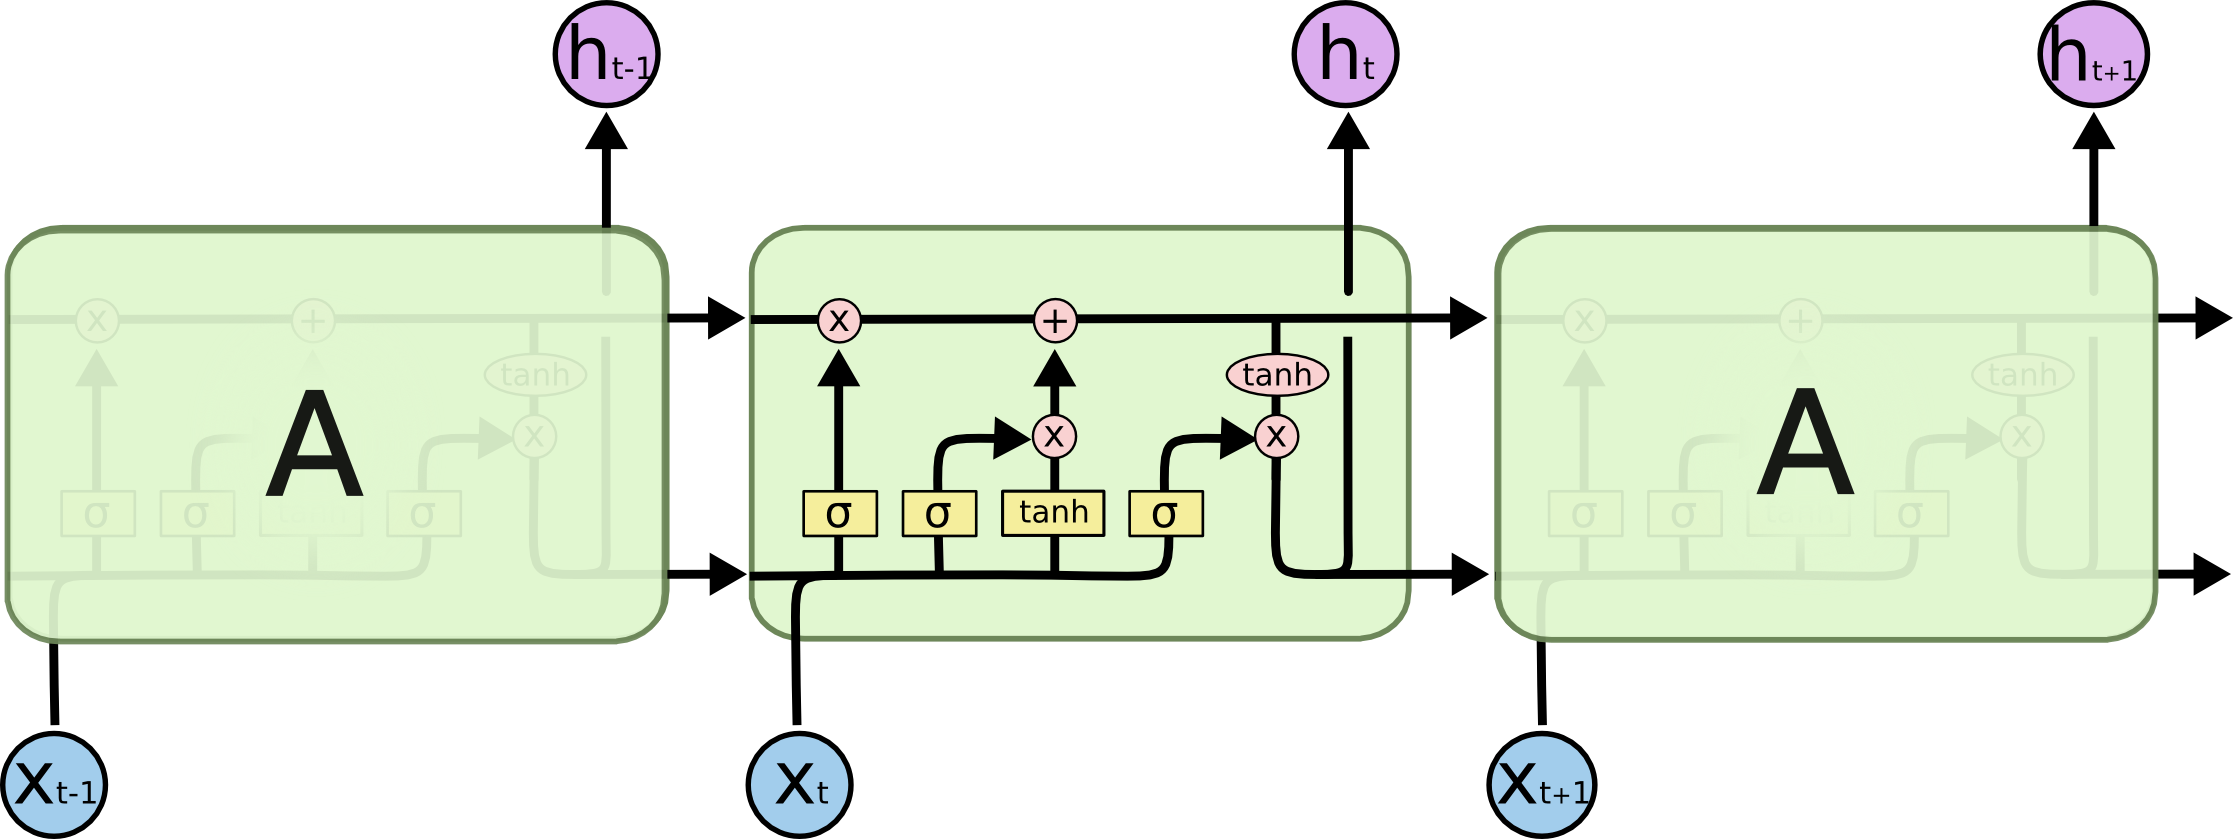 lstm-network-cell